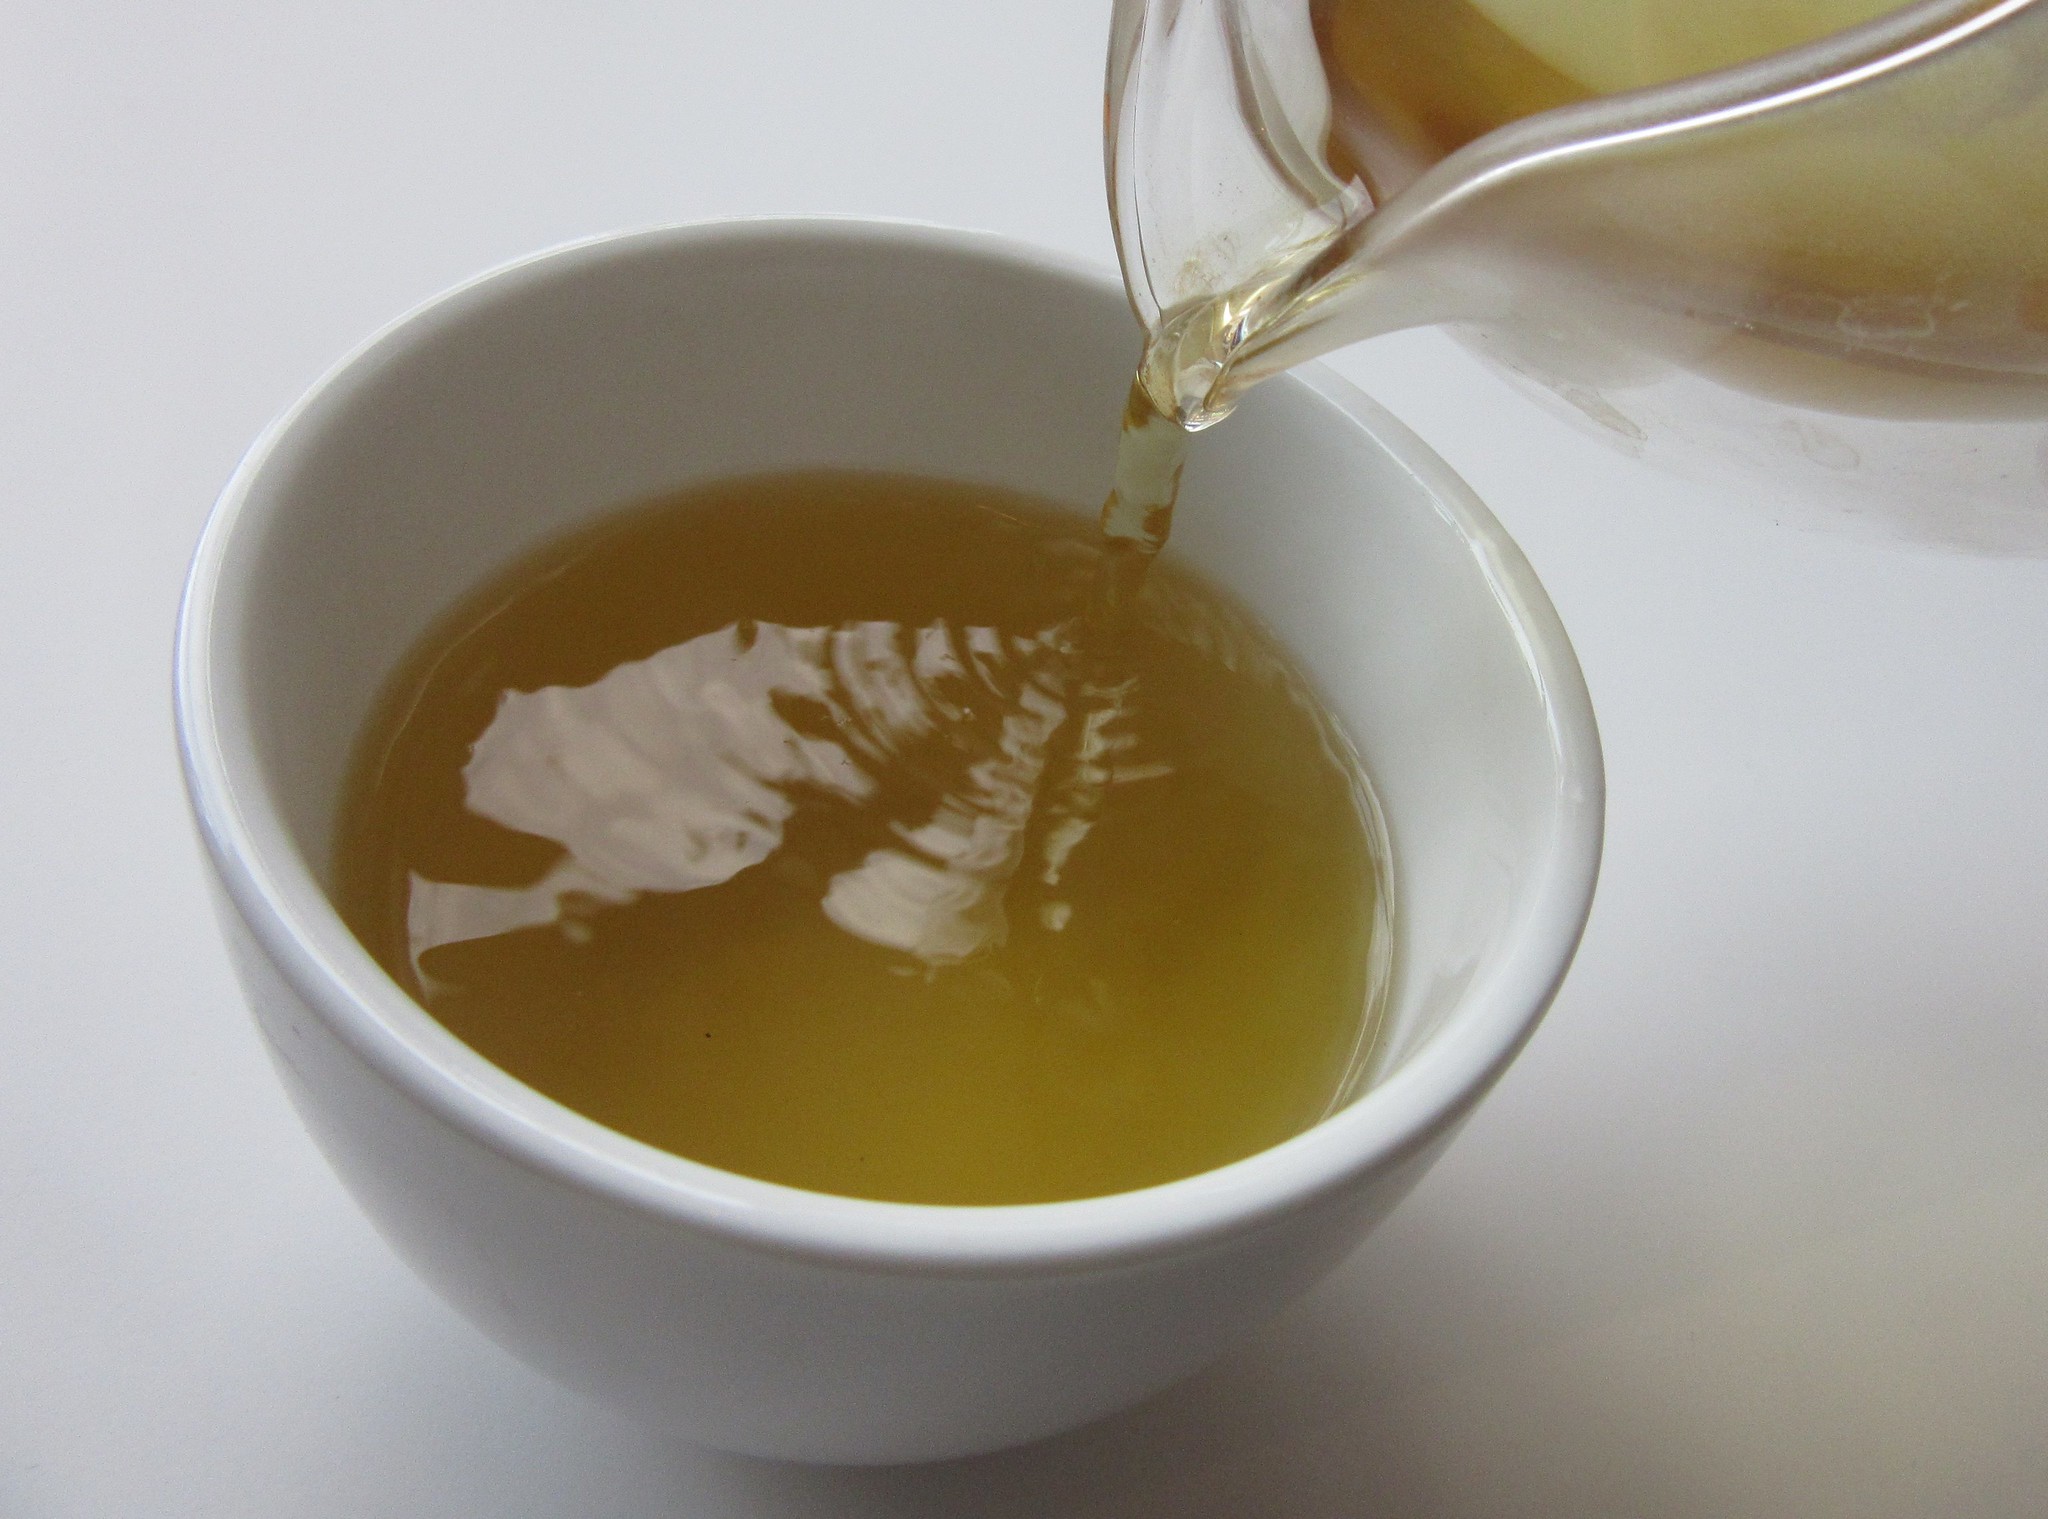 Zorba Paster: Green Tea May Be Good For Our Health